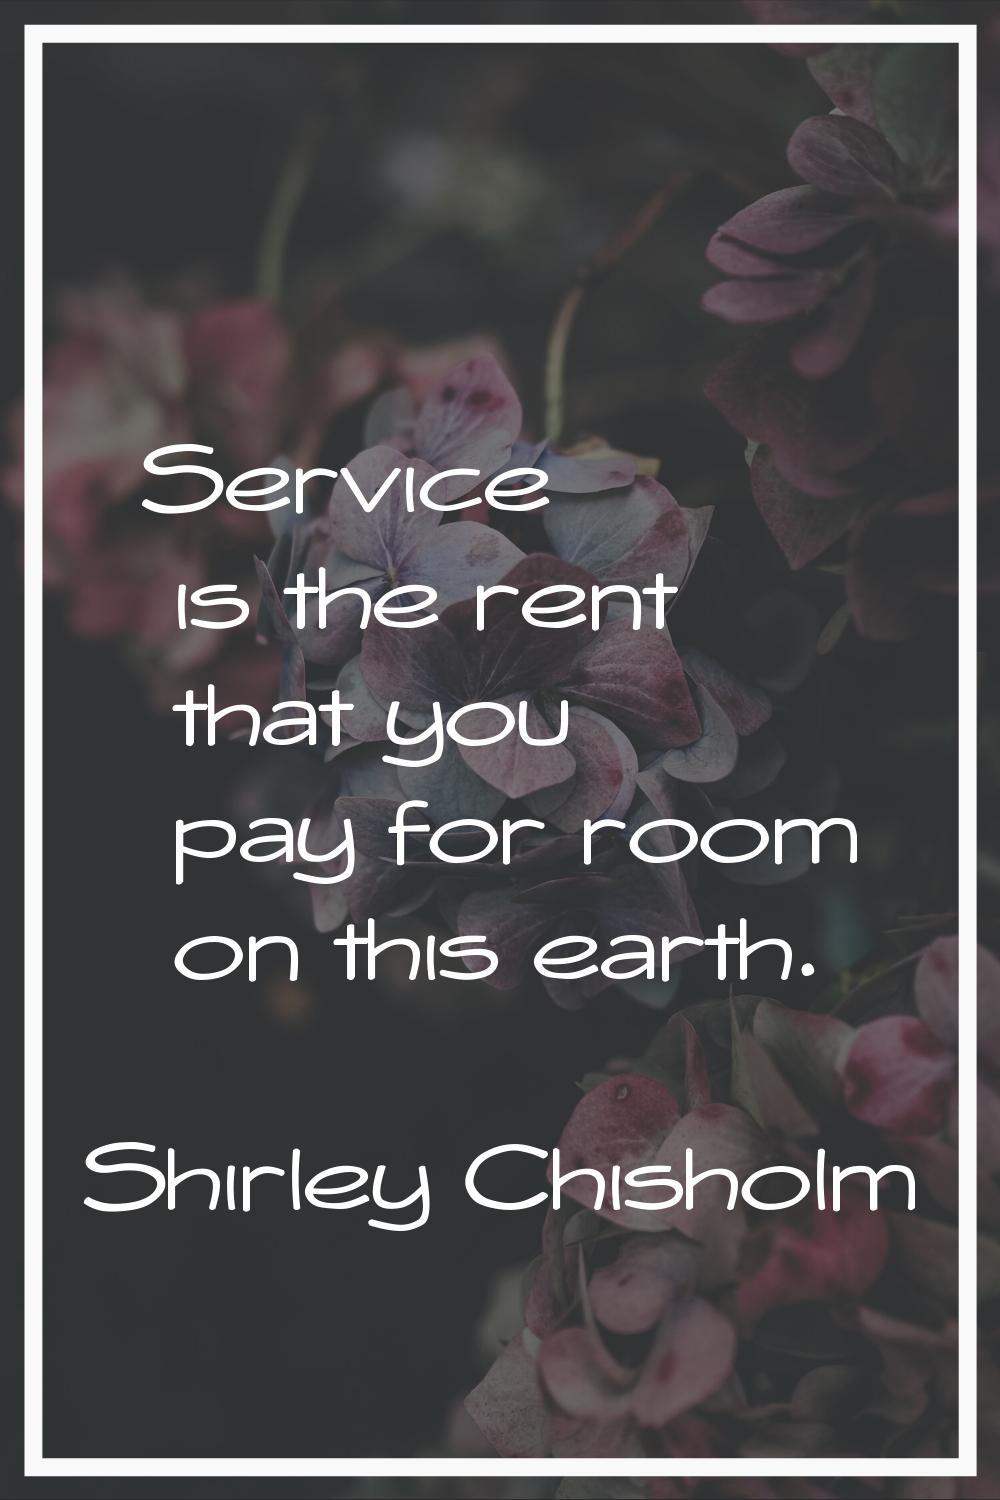 Service is the rent that you pay for room on this earth.